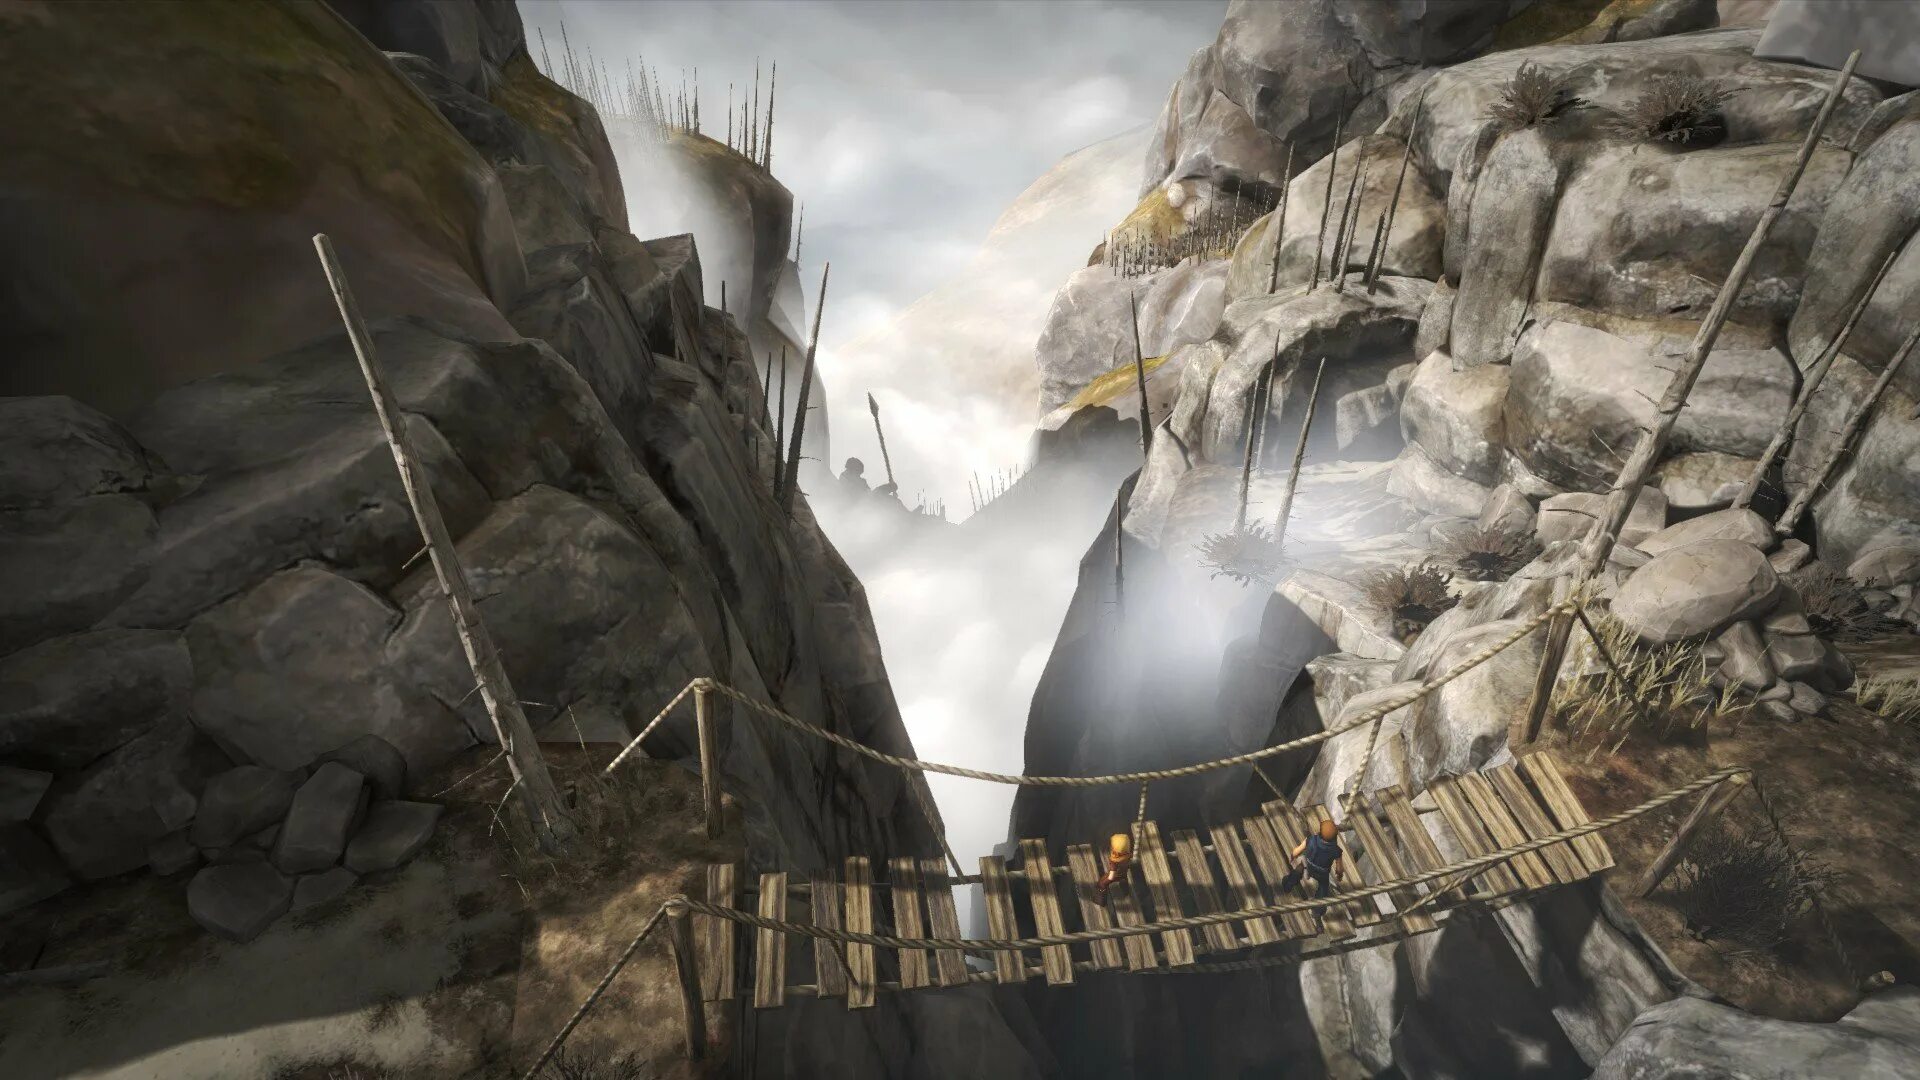 Brothers tale of two sons remake ps5. Brothers: a Tale of two sons. Brothers: a Tale of two sons (2013). Brothers a Tale of two sons диск. Brothers: a Tale of two sons (2013) игры.